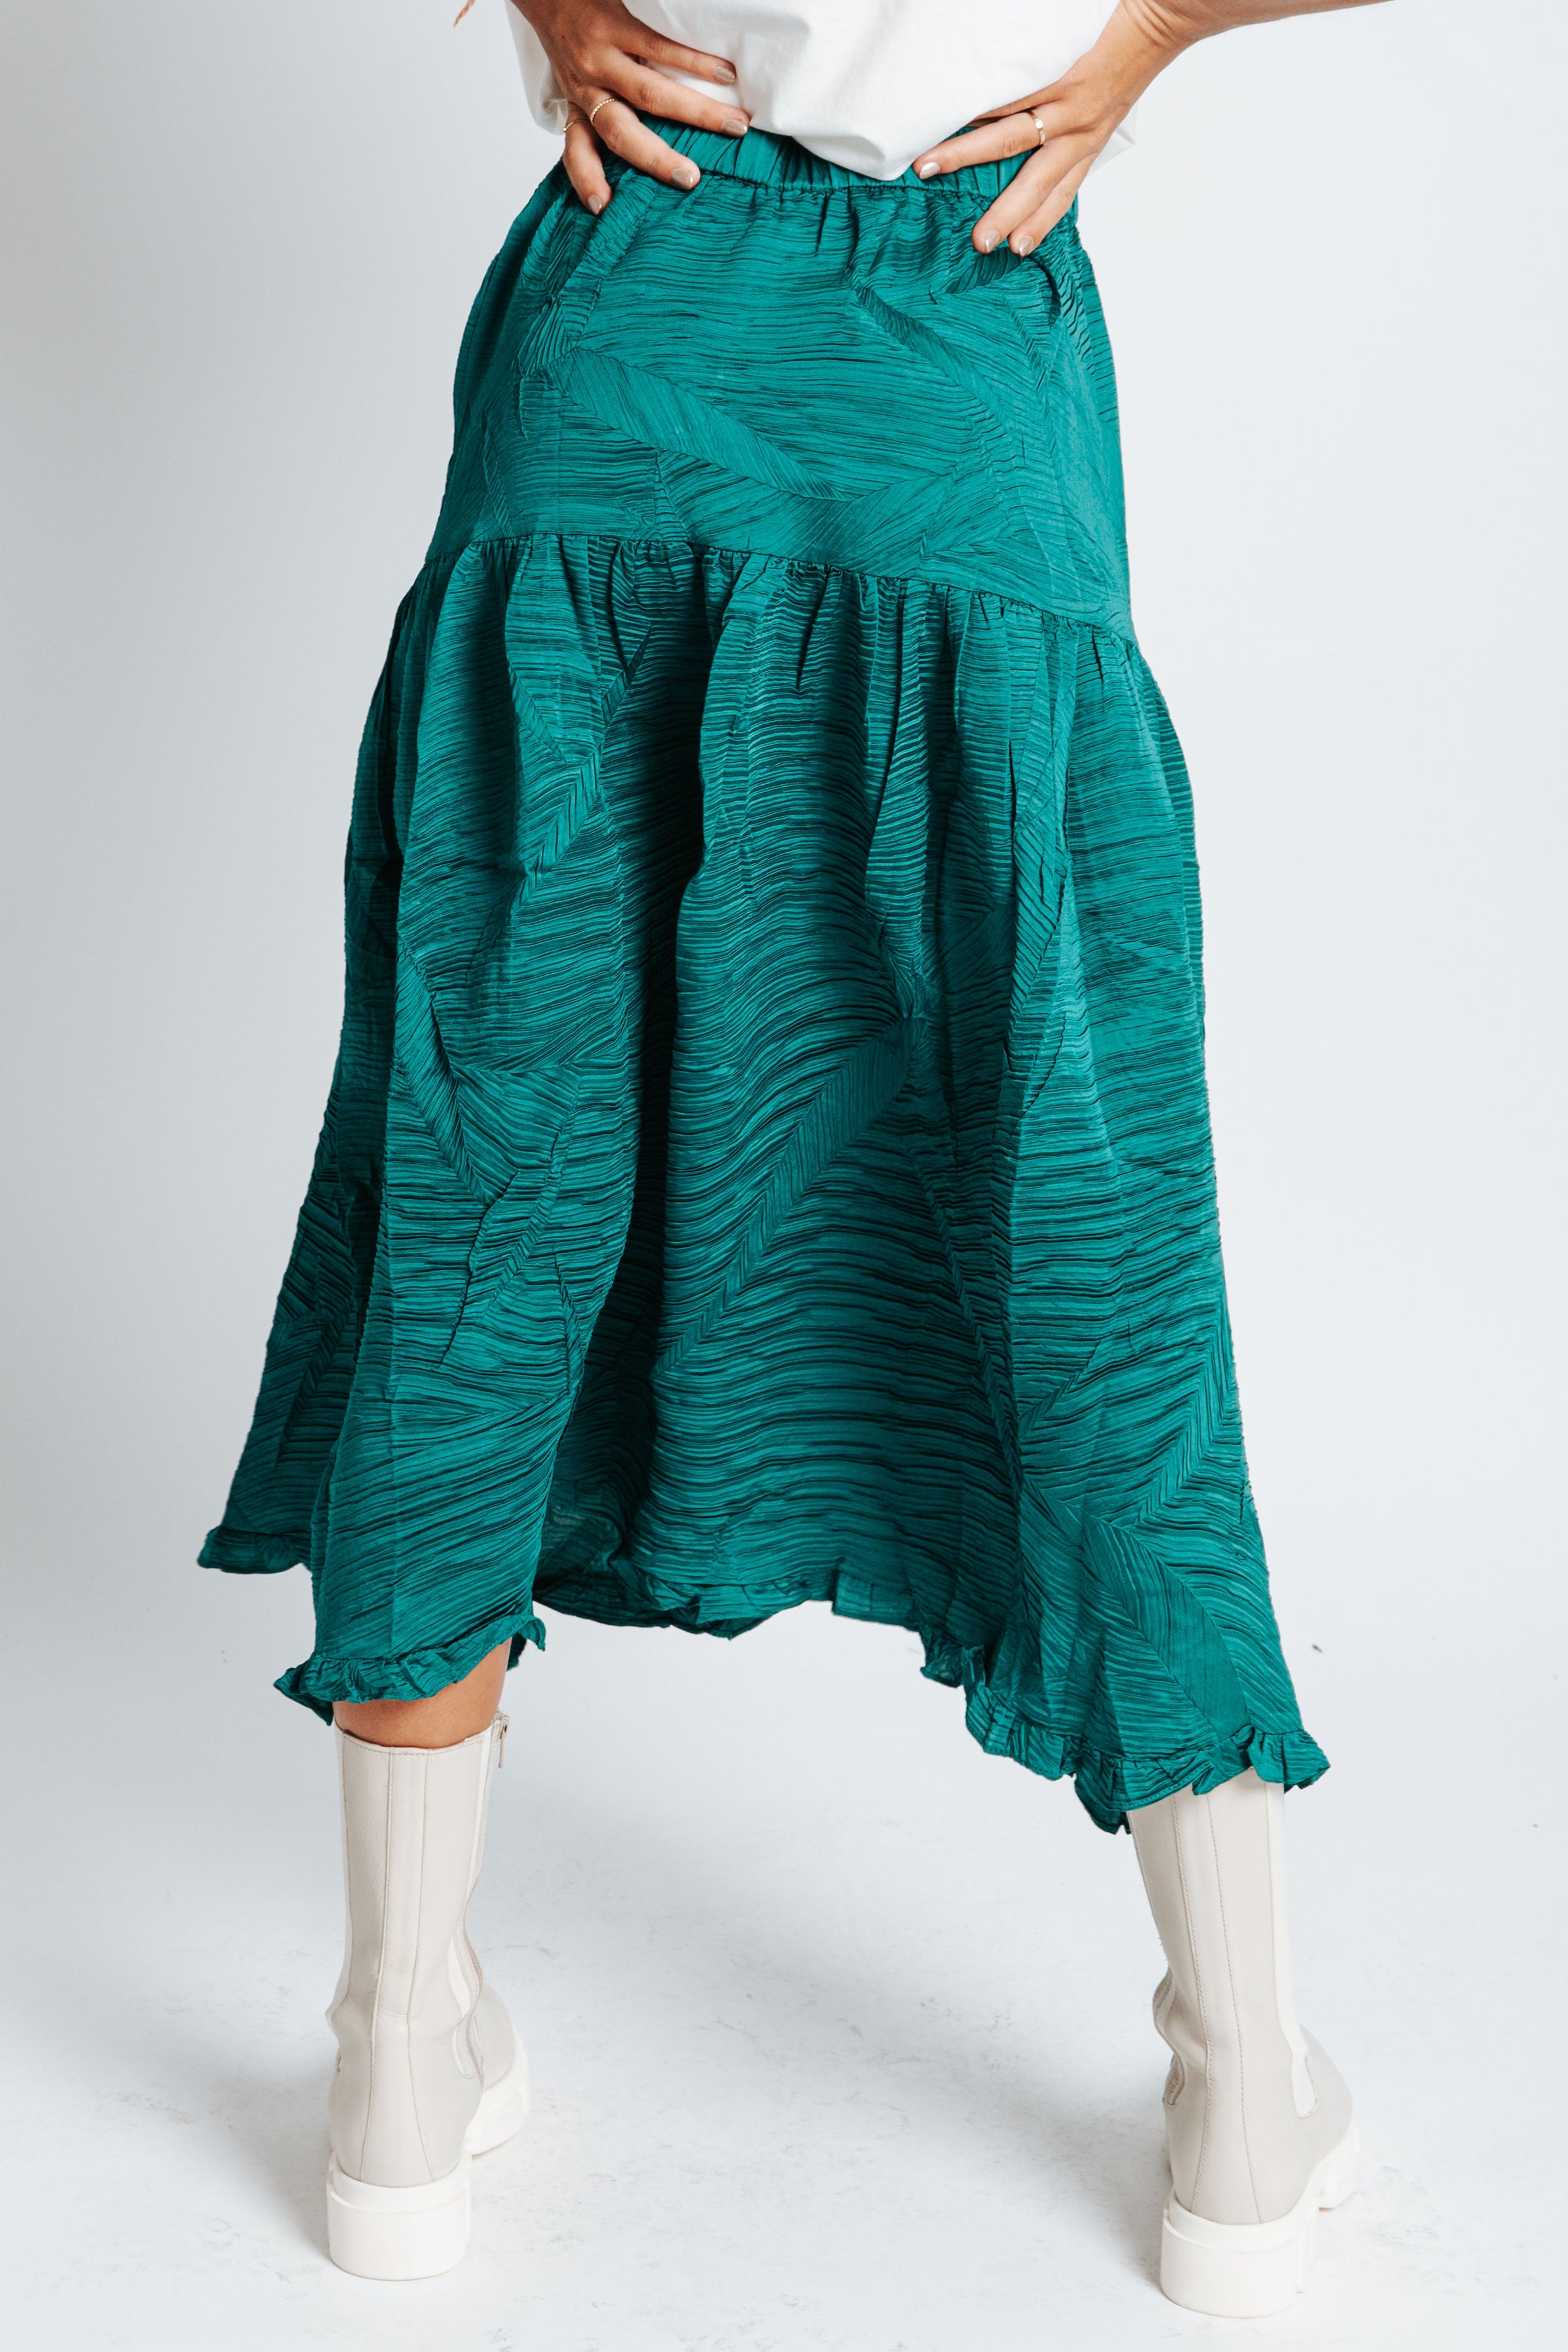 The Marnie Ruched Detail Skirt in Emerald Green